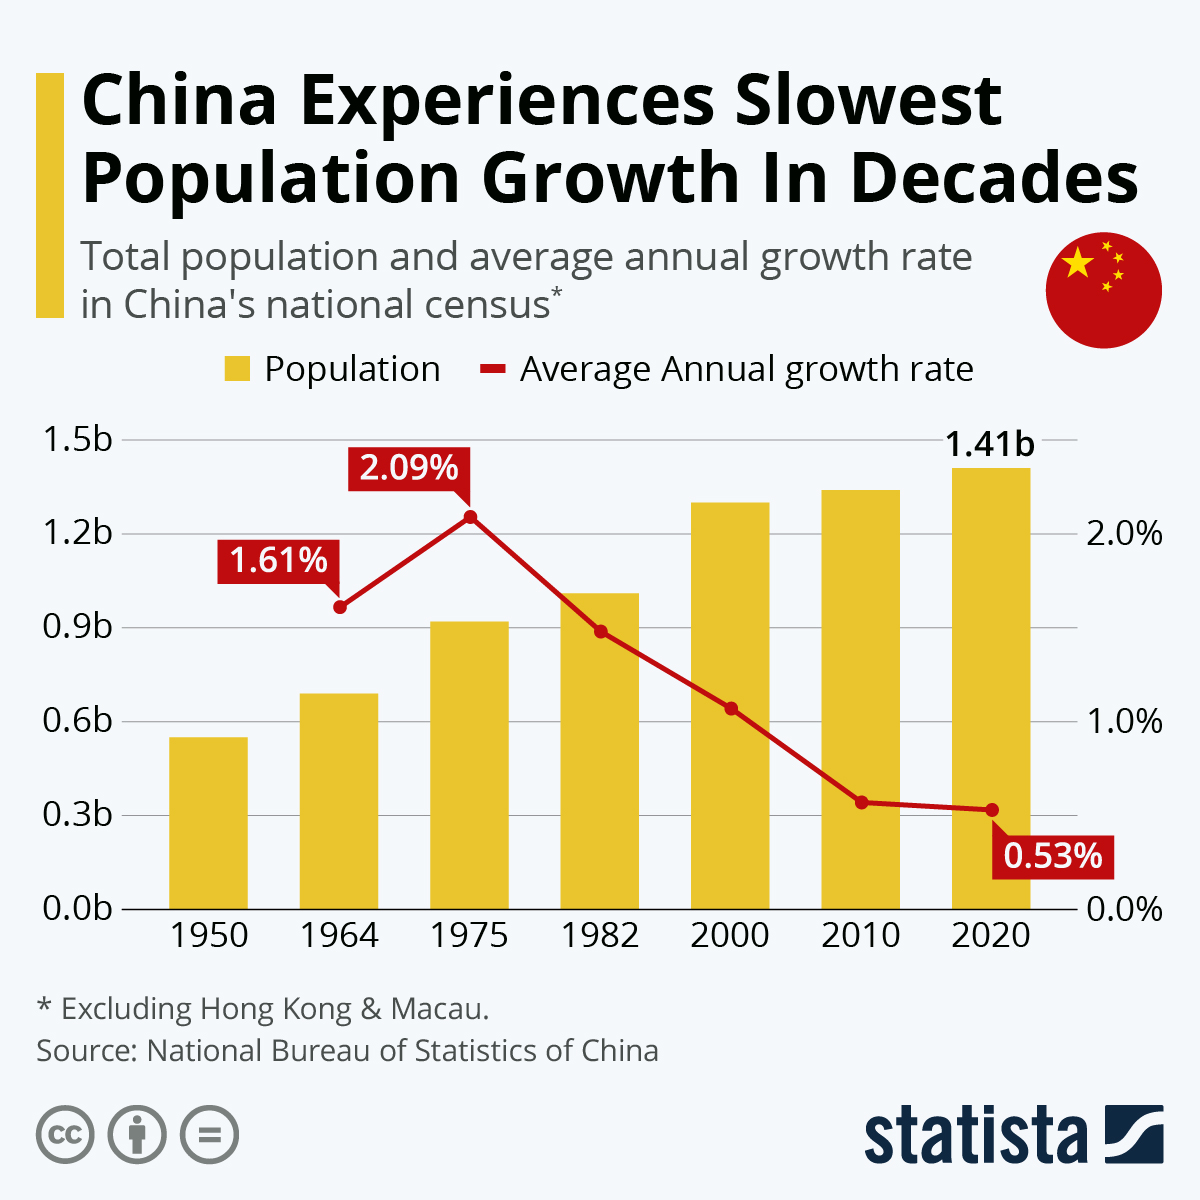 China Experiences Slowest Population Growth In Decades